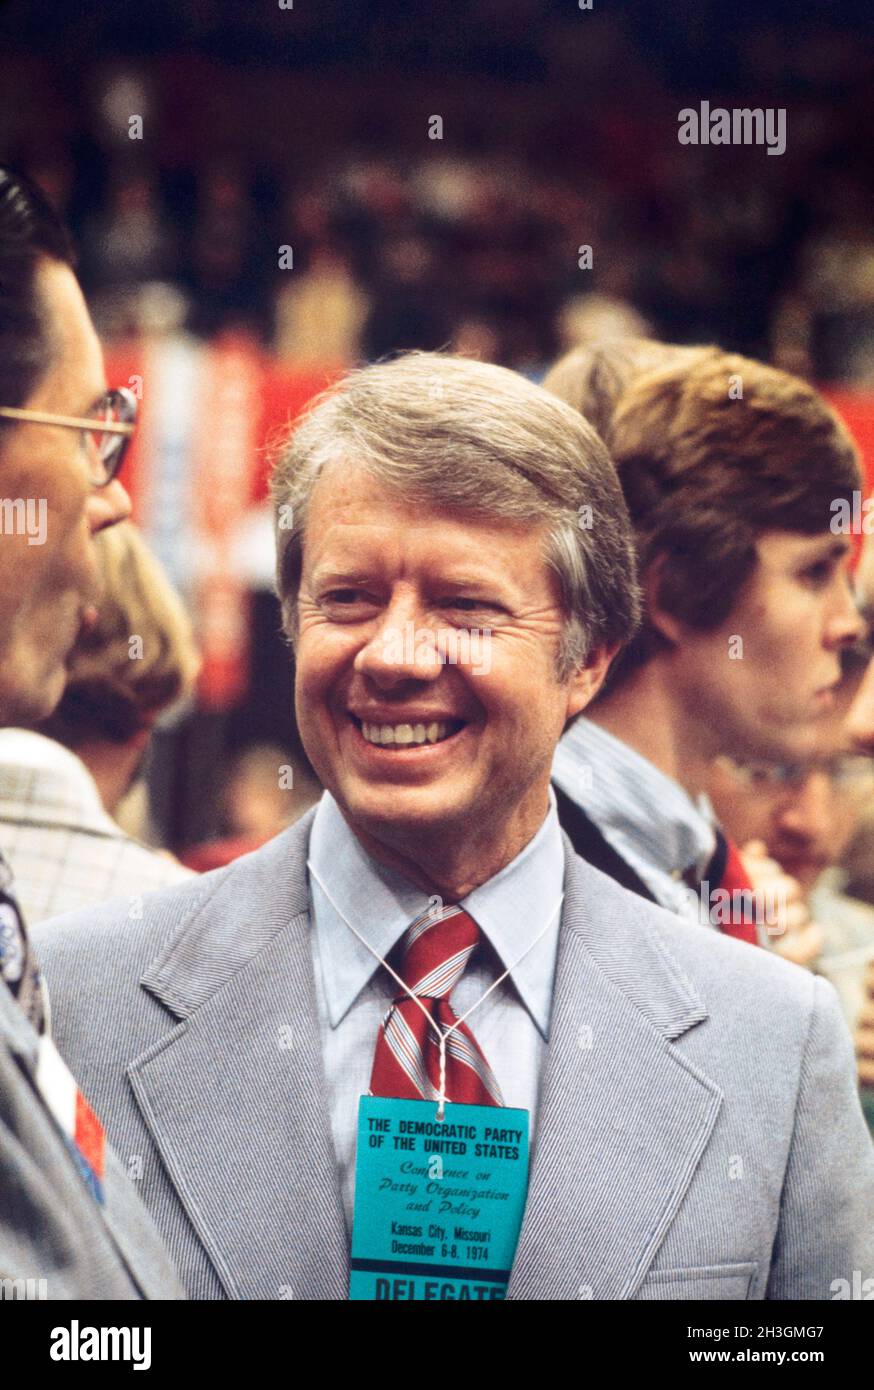 Georgia Governor Jimmy Carter attending the Democratic Party of the United States Conference on Party Organization and Policy, Kansas City, Missouri, USA, Bernard Gotfryd, December 6-8, 1974 Stock Photo